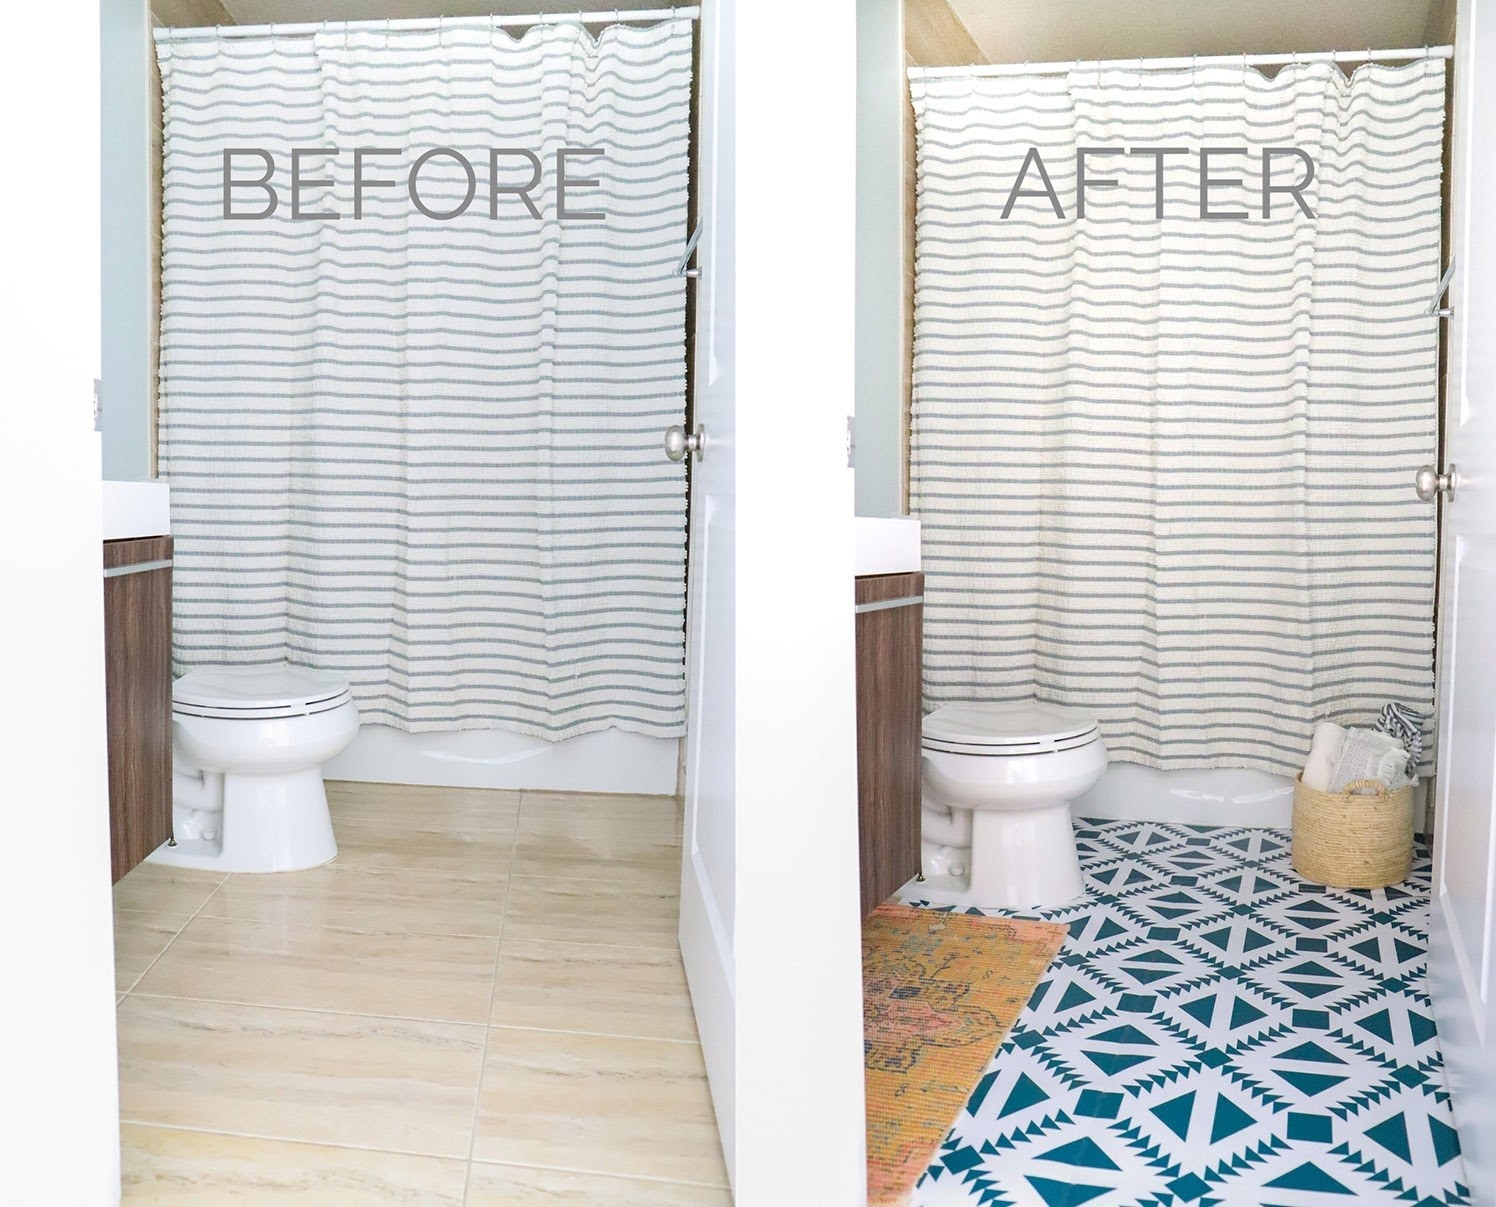 before: tan bathroom floor after: floor with teal and white pattern